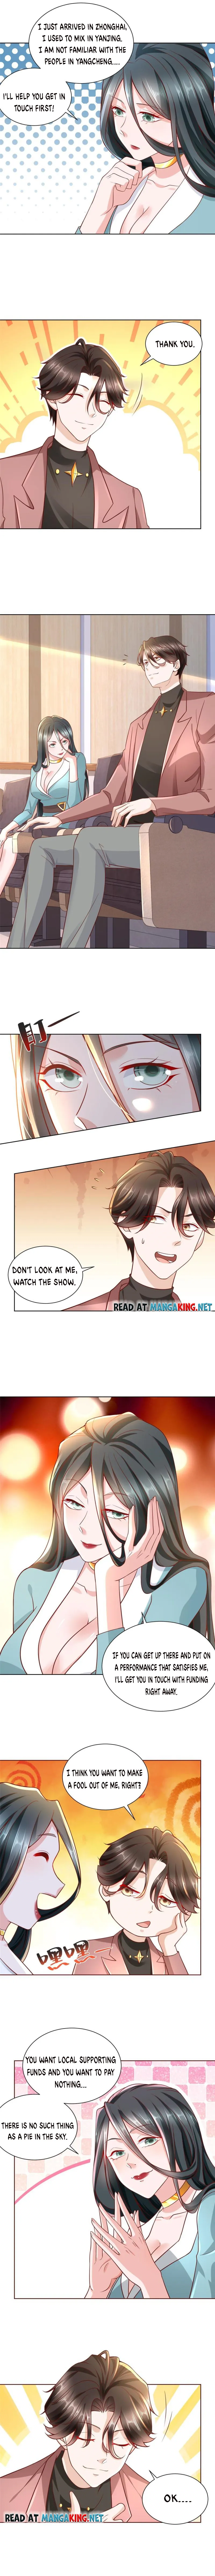 I randomly have a new career every week chapter 184